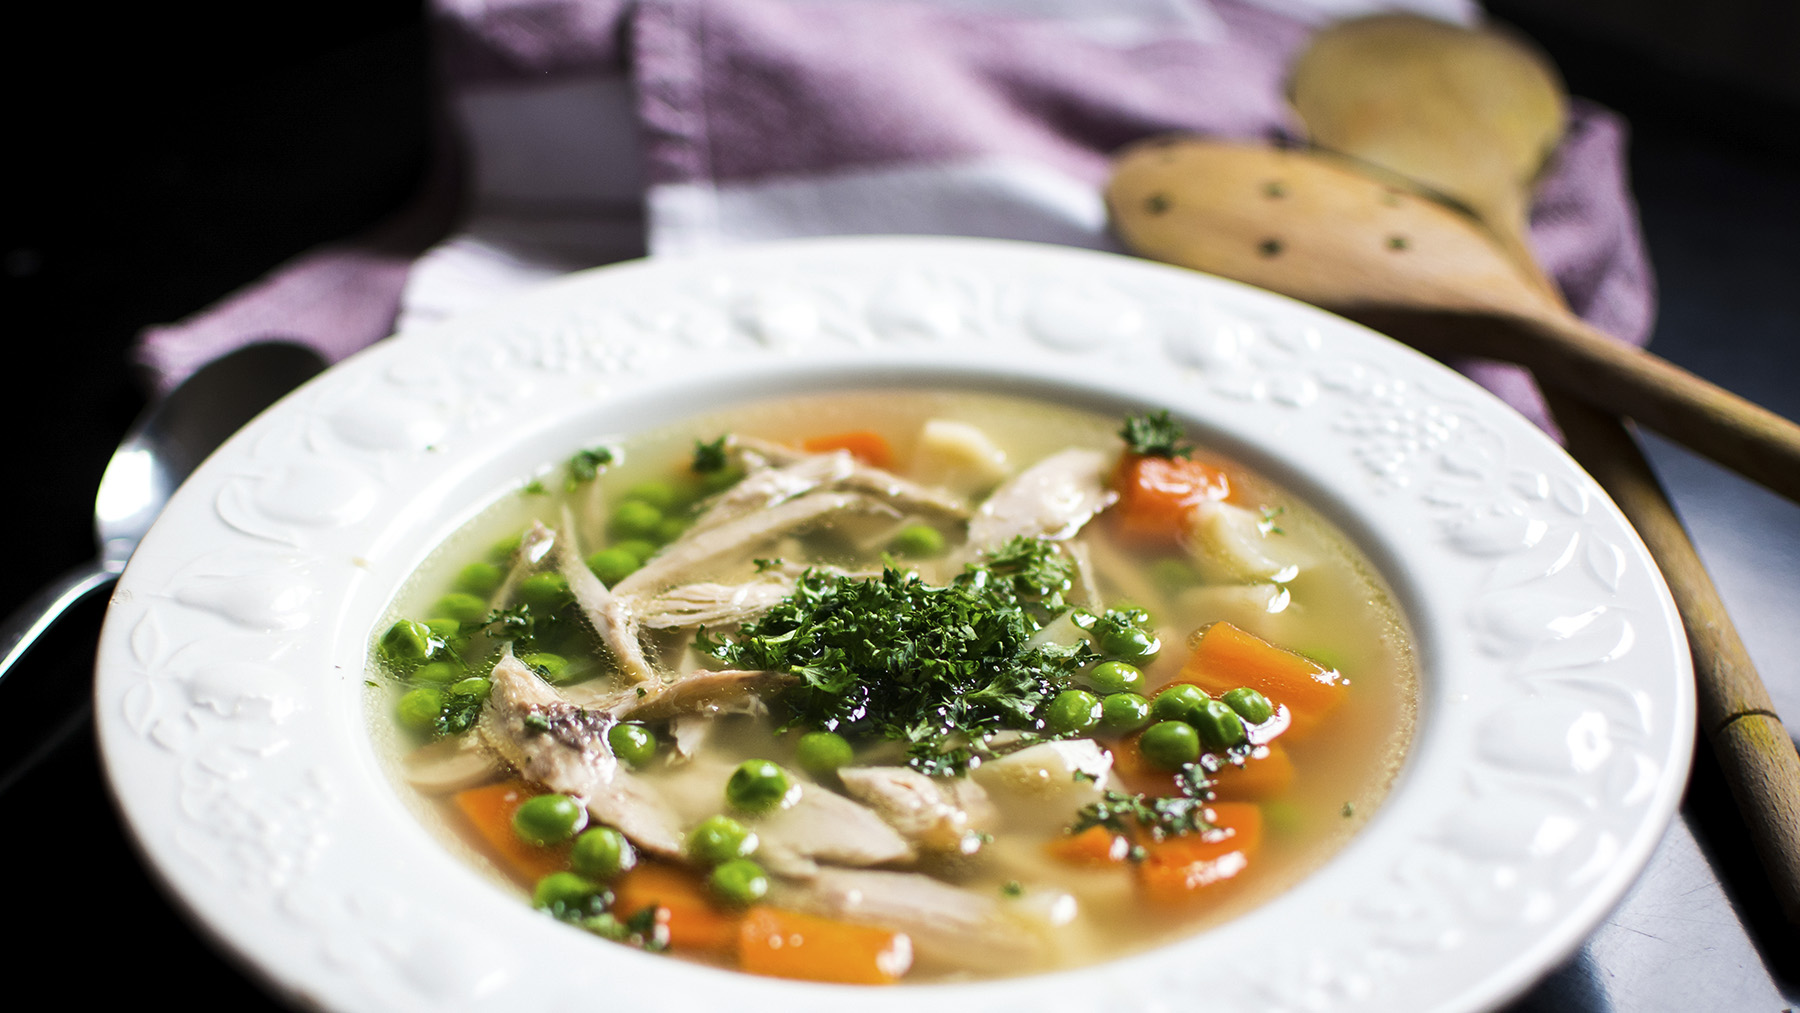 Stock photo of a bowl of chicken and vegetable broth soup from Creative Commons (courtesy of RawPixel.com)